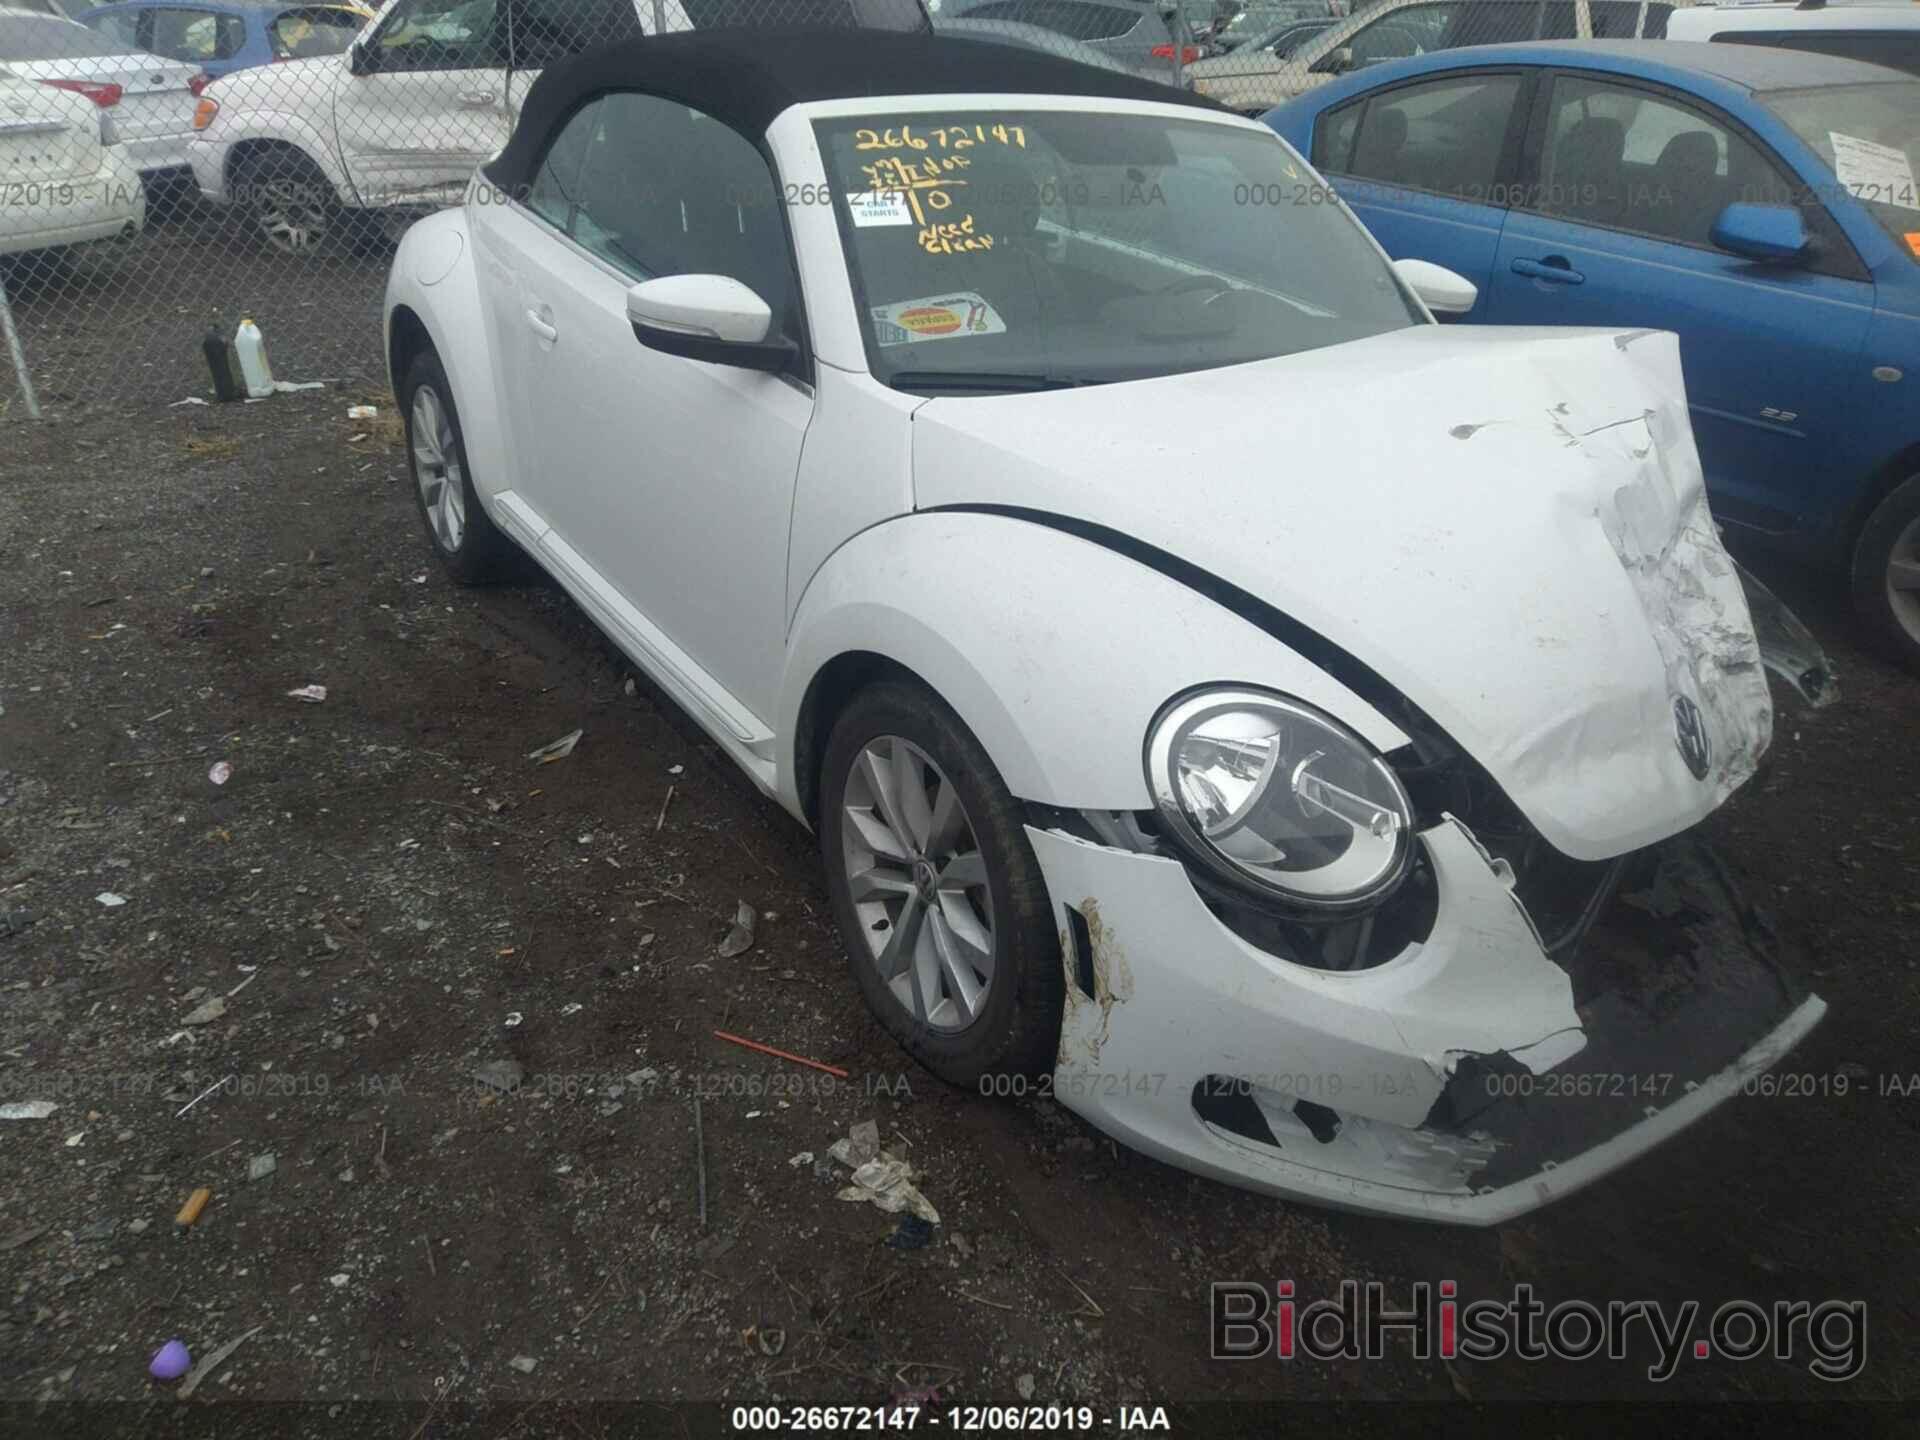 Photo 3VW5A7AT1FM820501 - VOLKSWAGEN BEETLE 2015